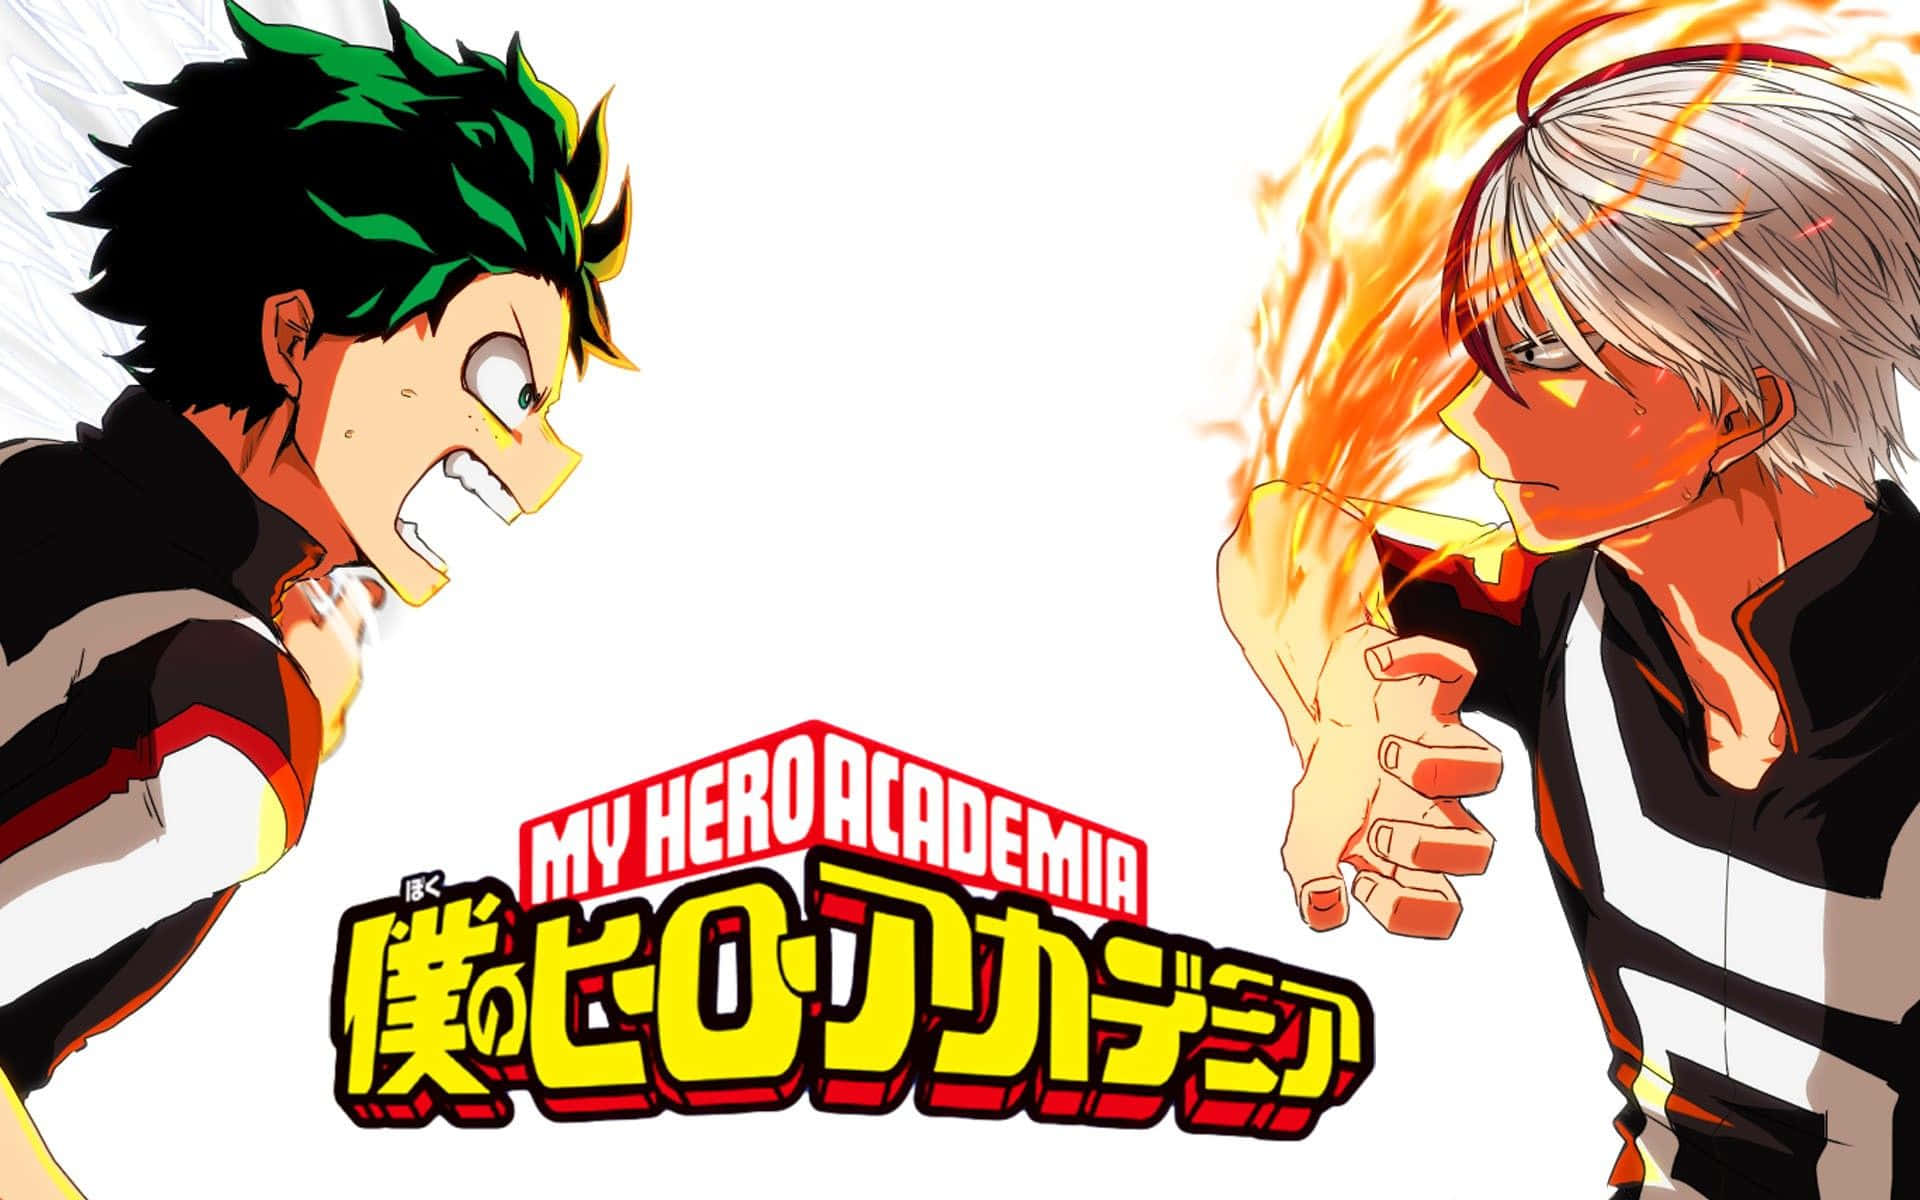 All Might and his students - the My Hero Academia Class